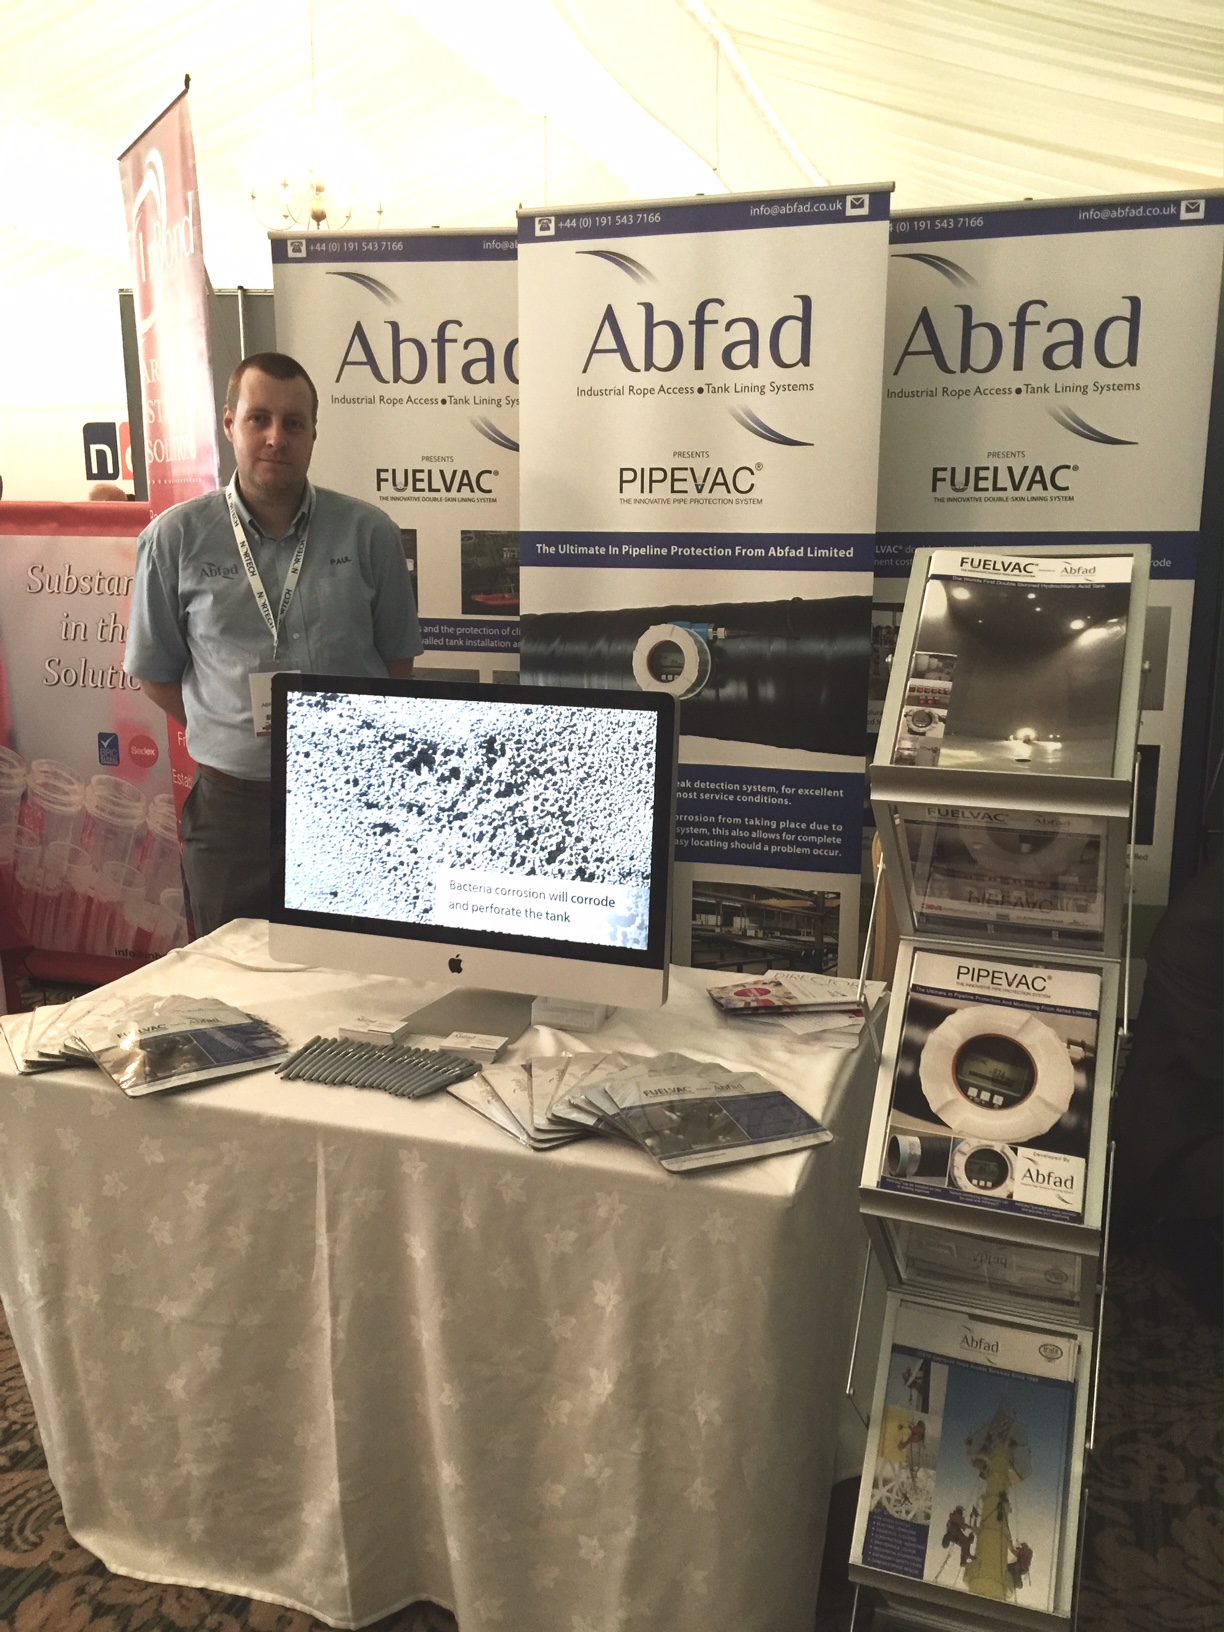 Abfad's stand at NEPIC Meet The Members 2016